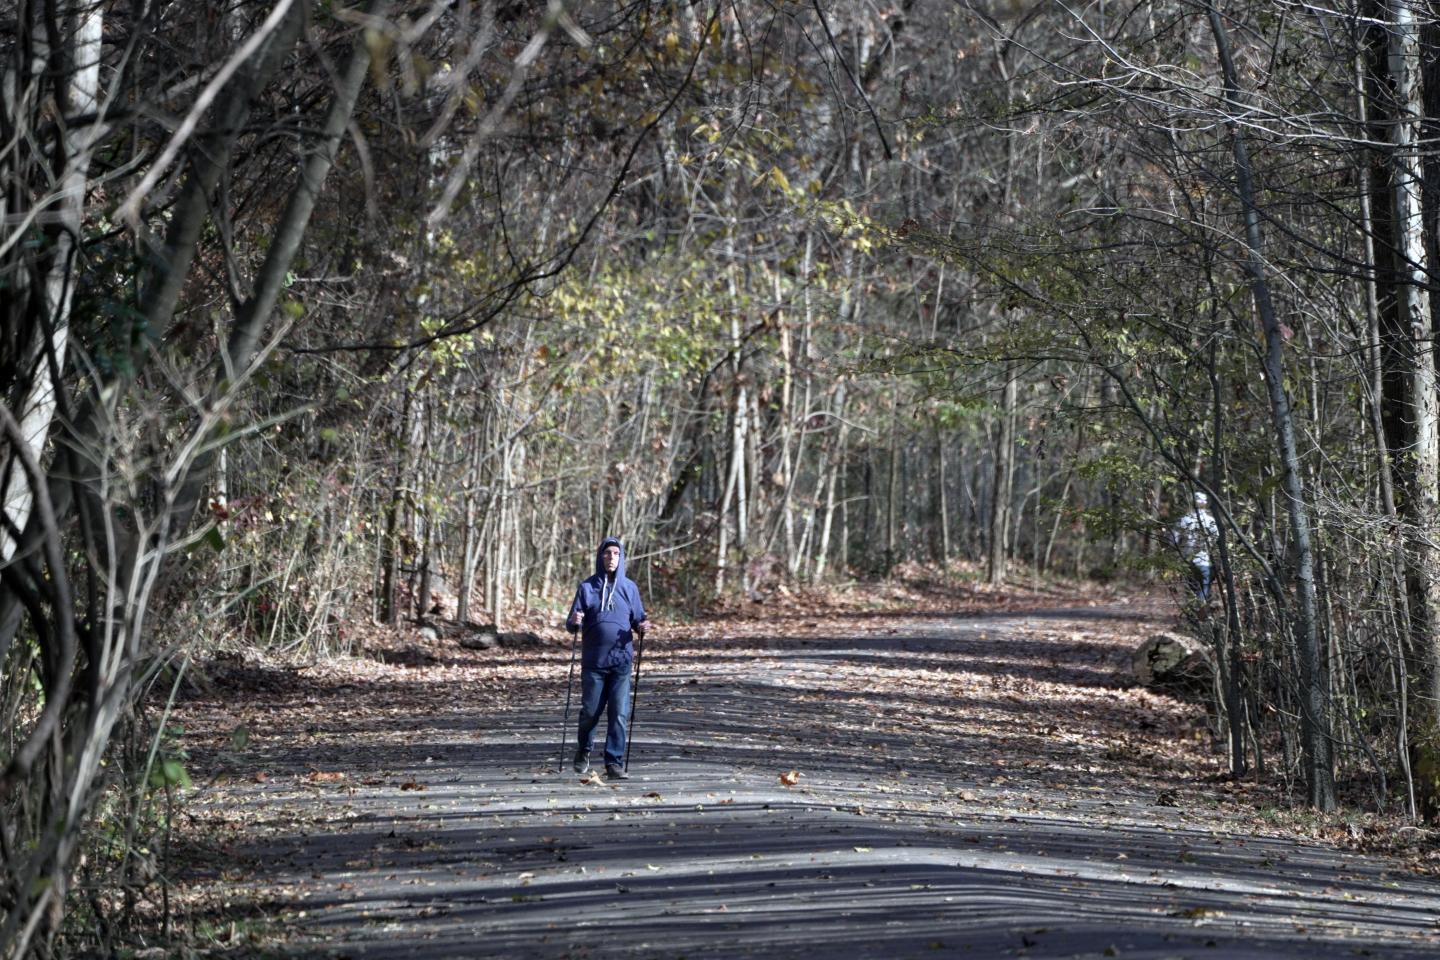 A person in the distance walking down a paved path in Overton Park